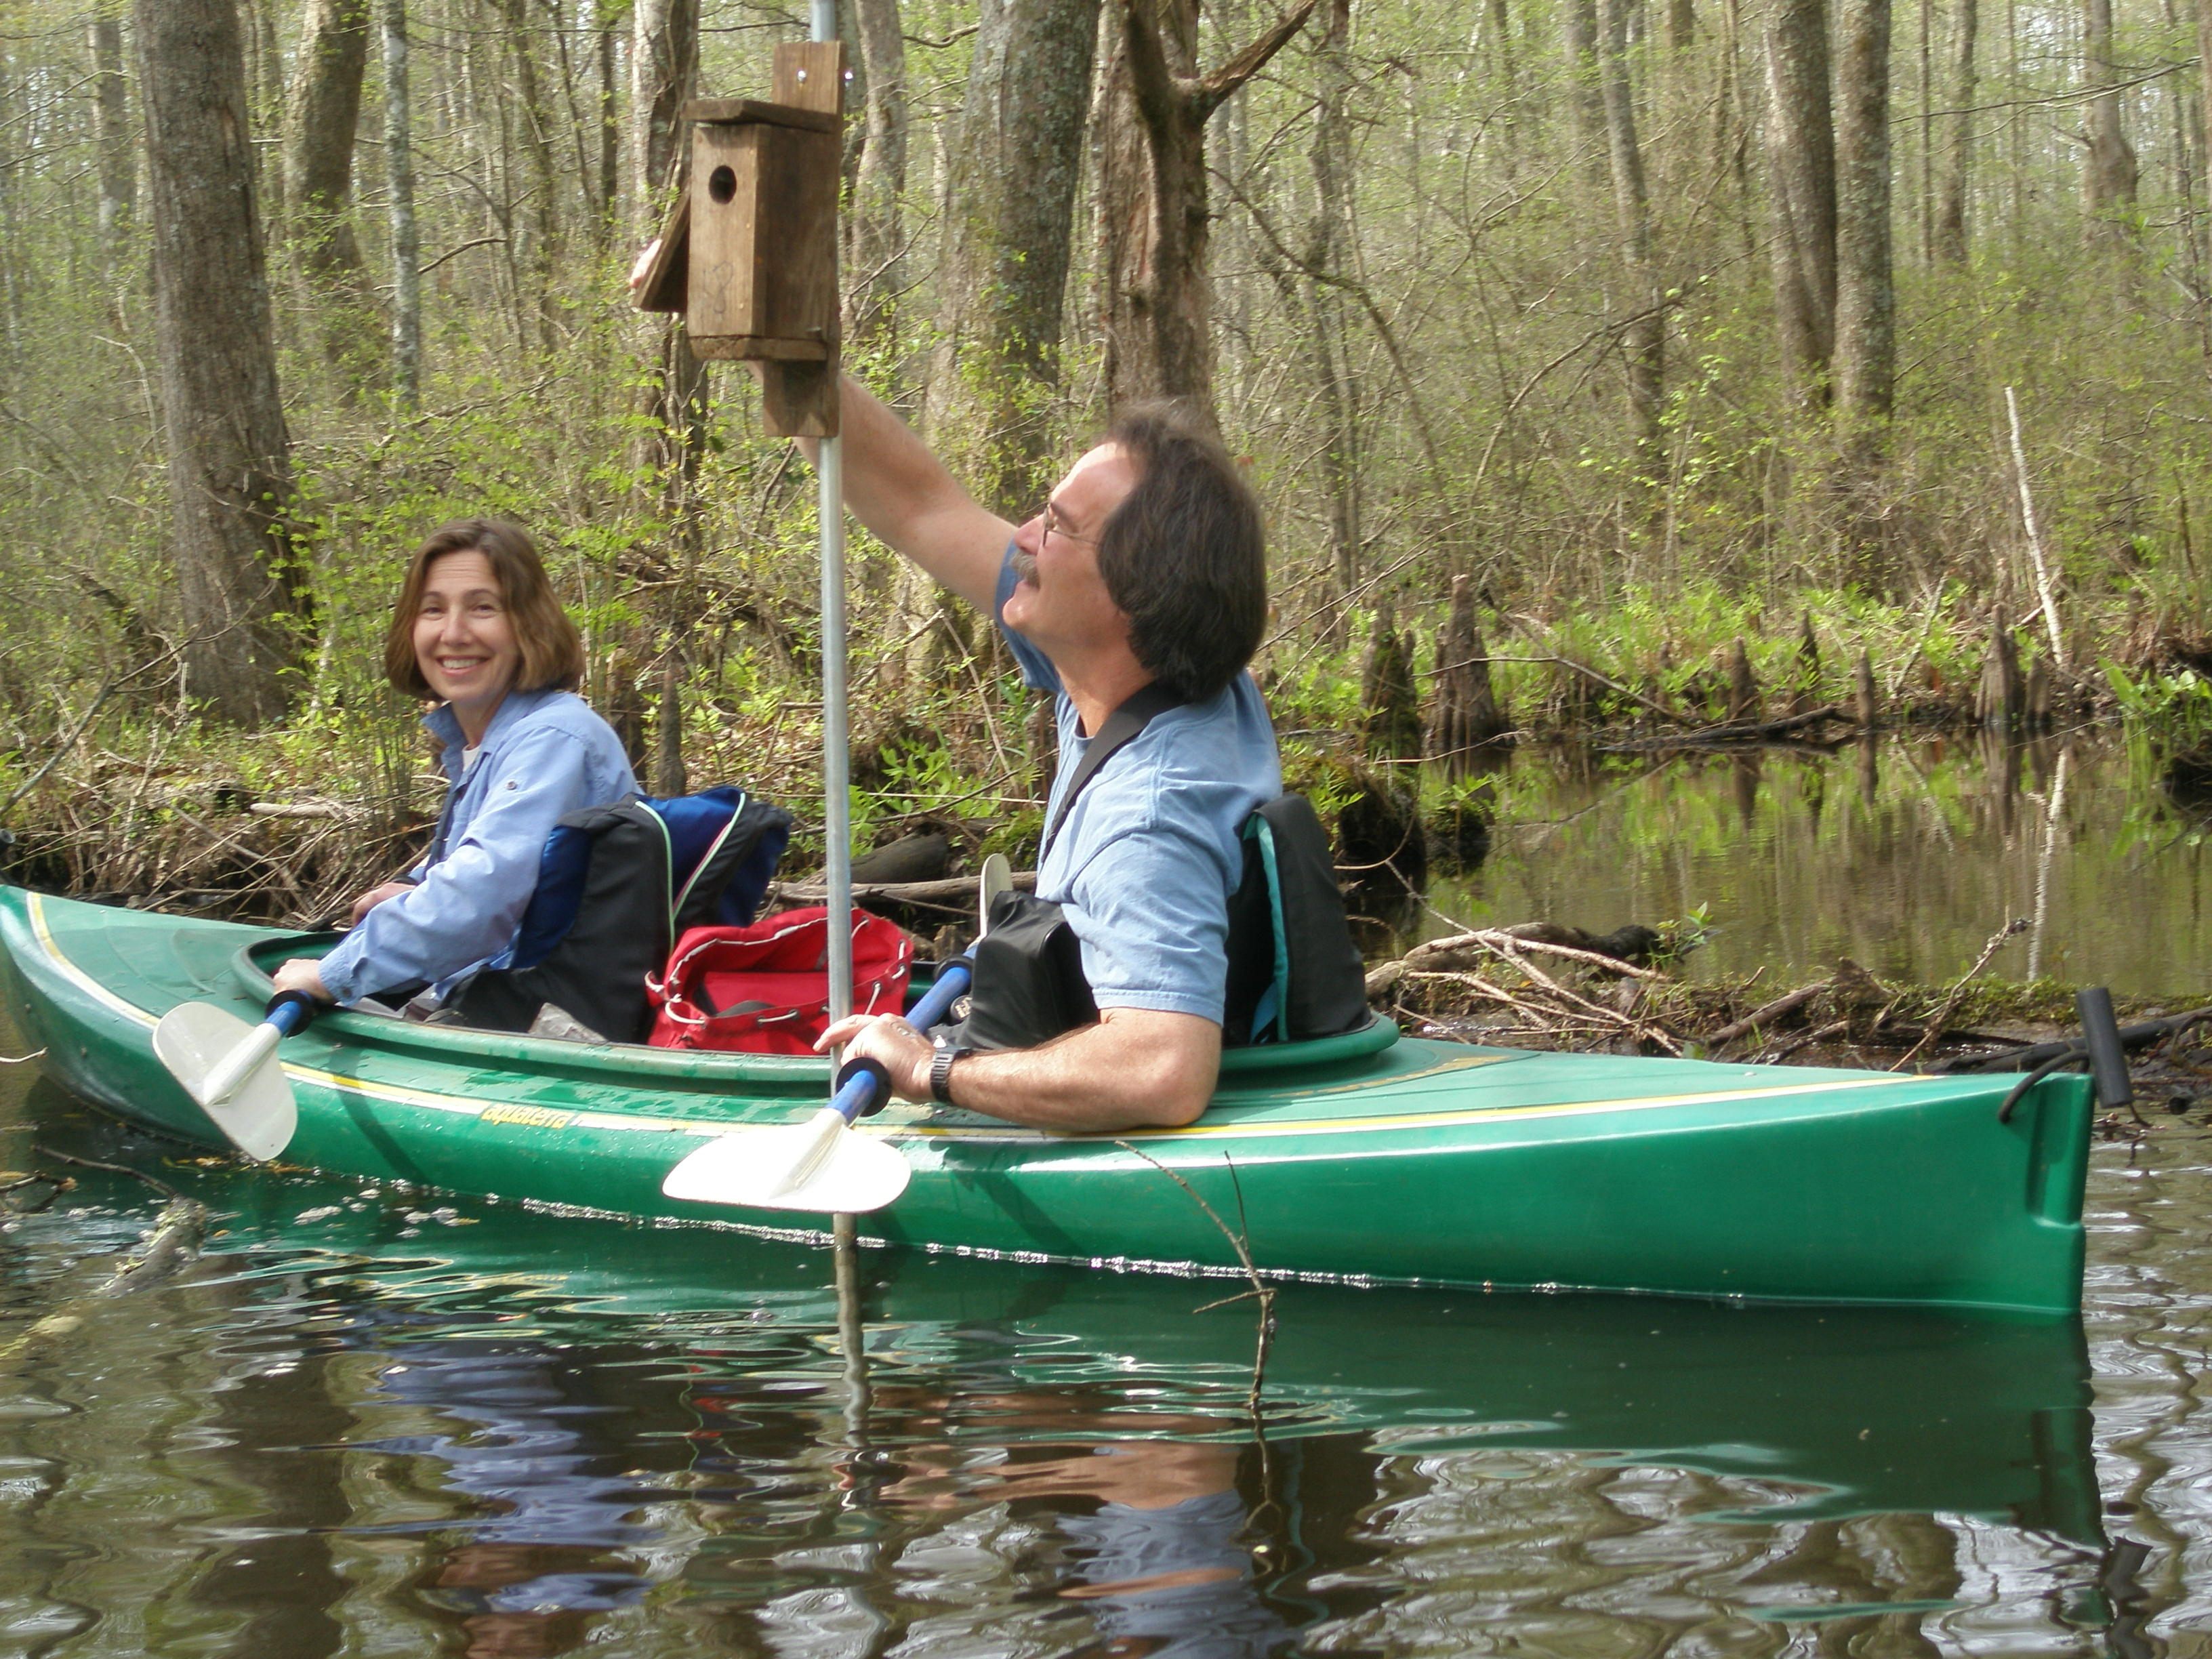 Two people in a kayak on a woodland pond, next to a bird box supported on a post.